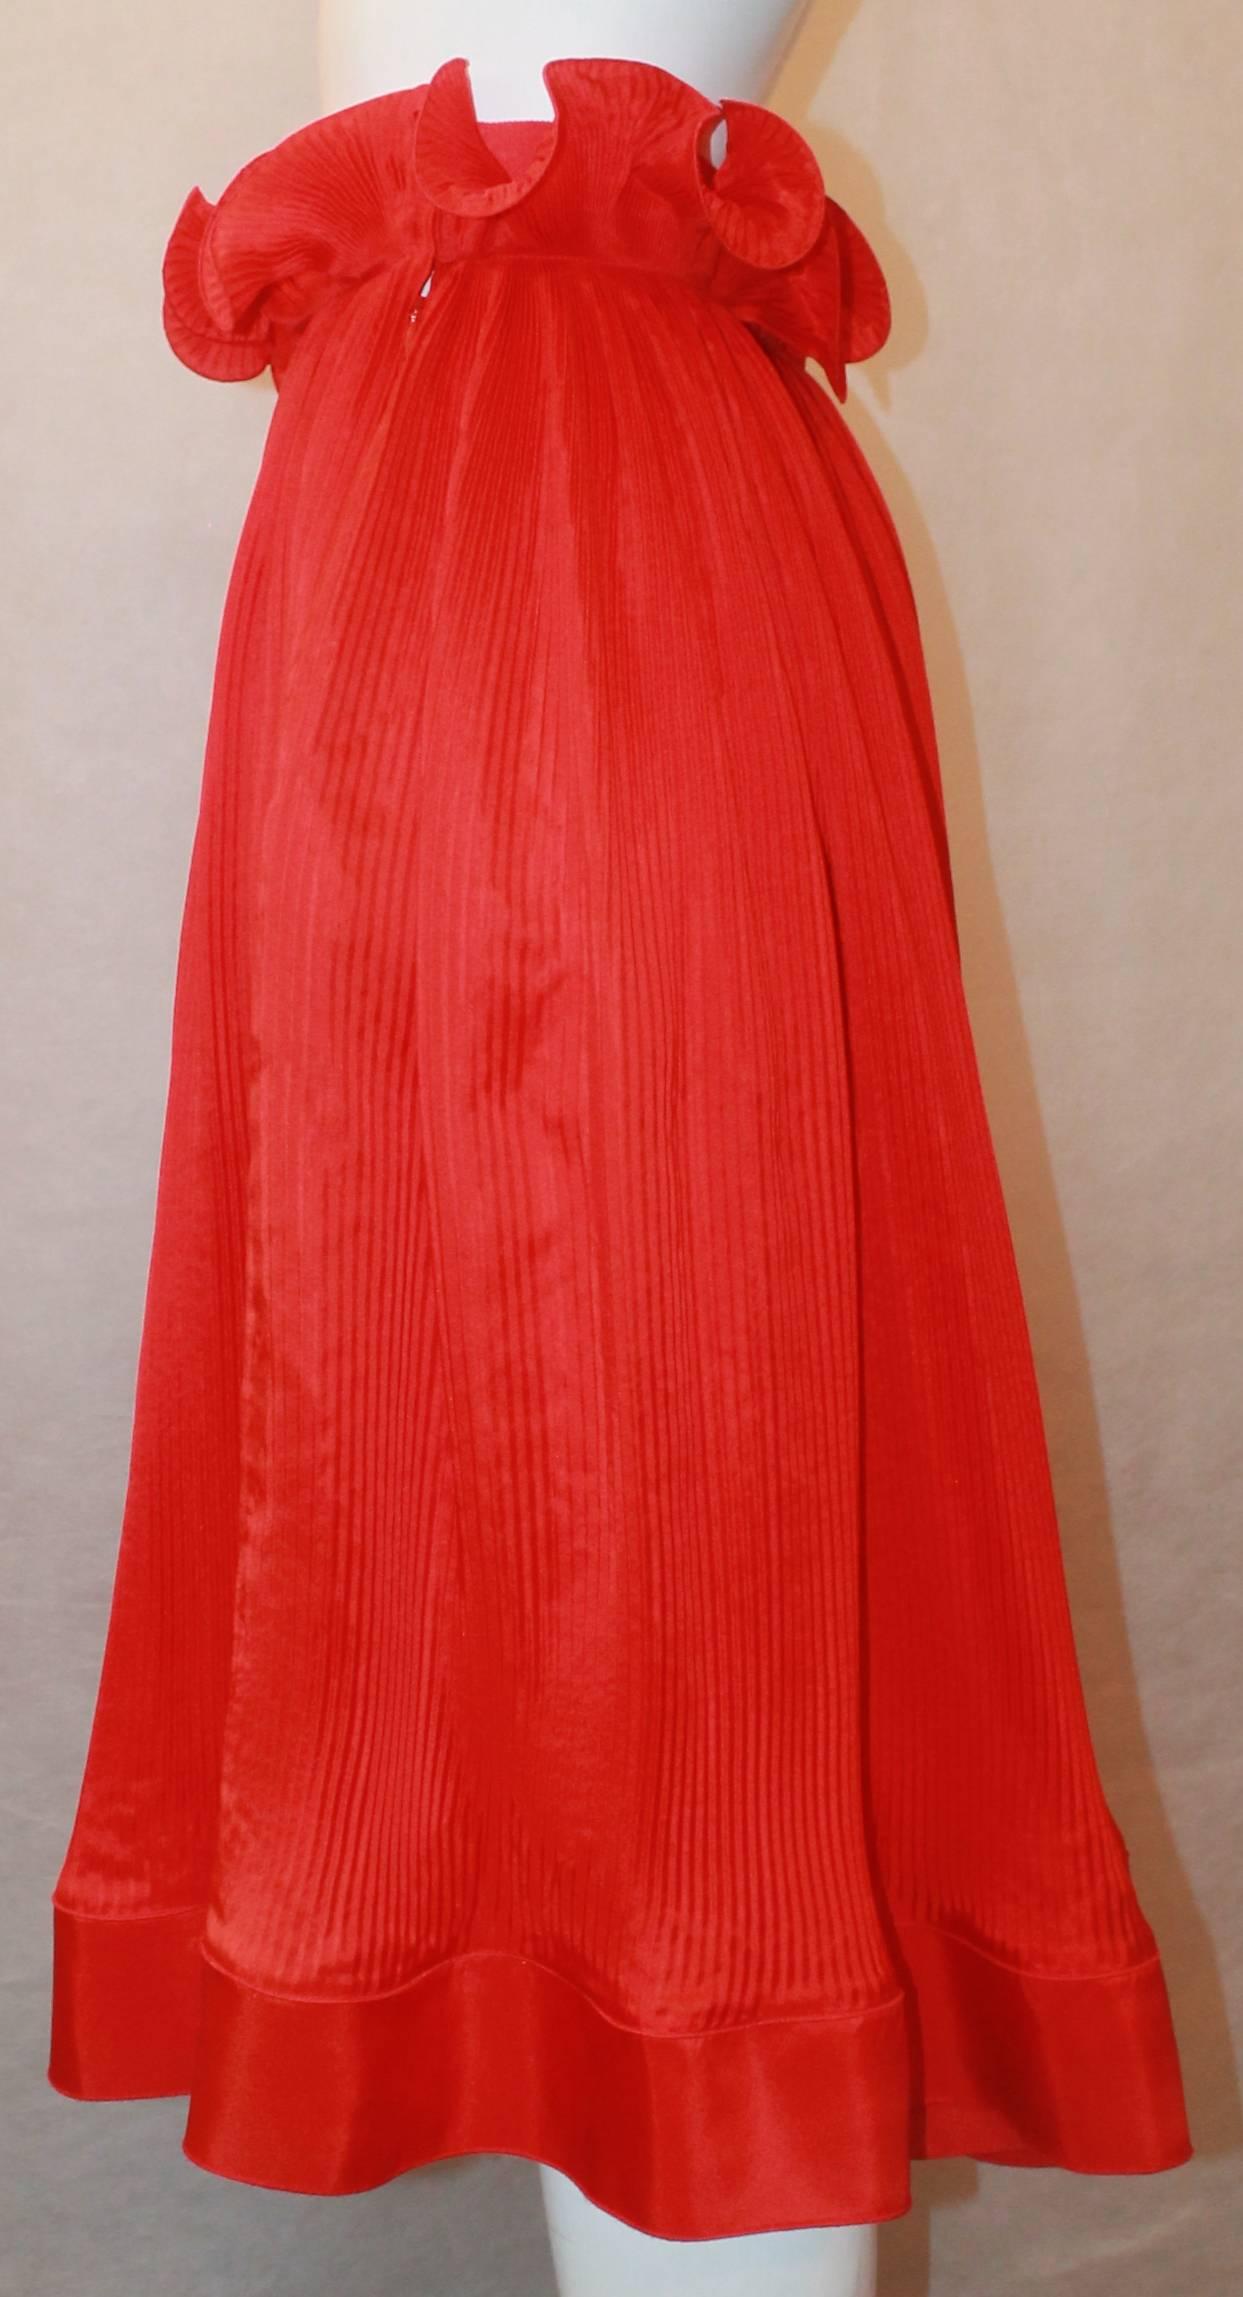 Stella McCartney Red Silk Pleated Skirt with Top Gathering - 40. This skirt is in excellent condition and has a side zipper. It is mid-length with s bottom plain trim & gatherings at the top waist that have a swirling look. It has a very slight